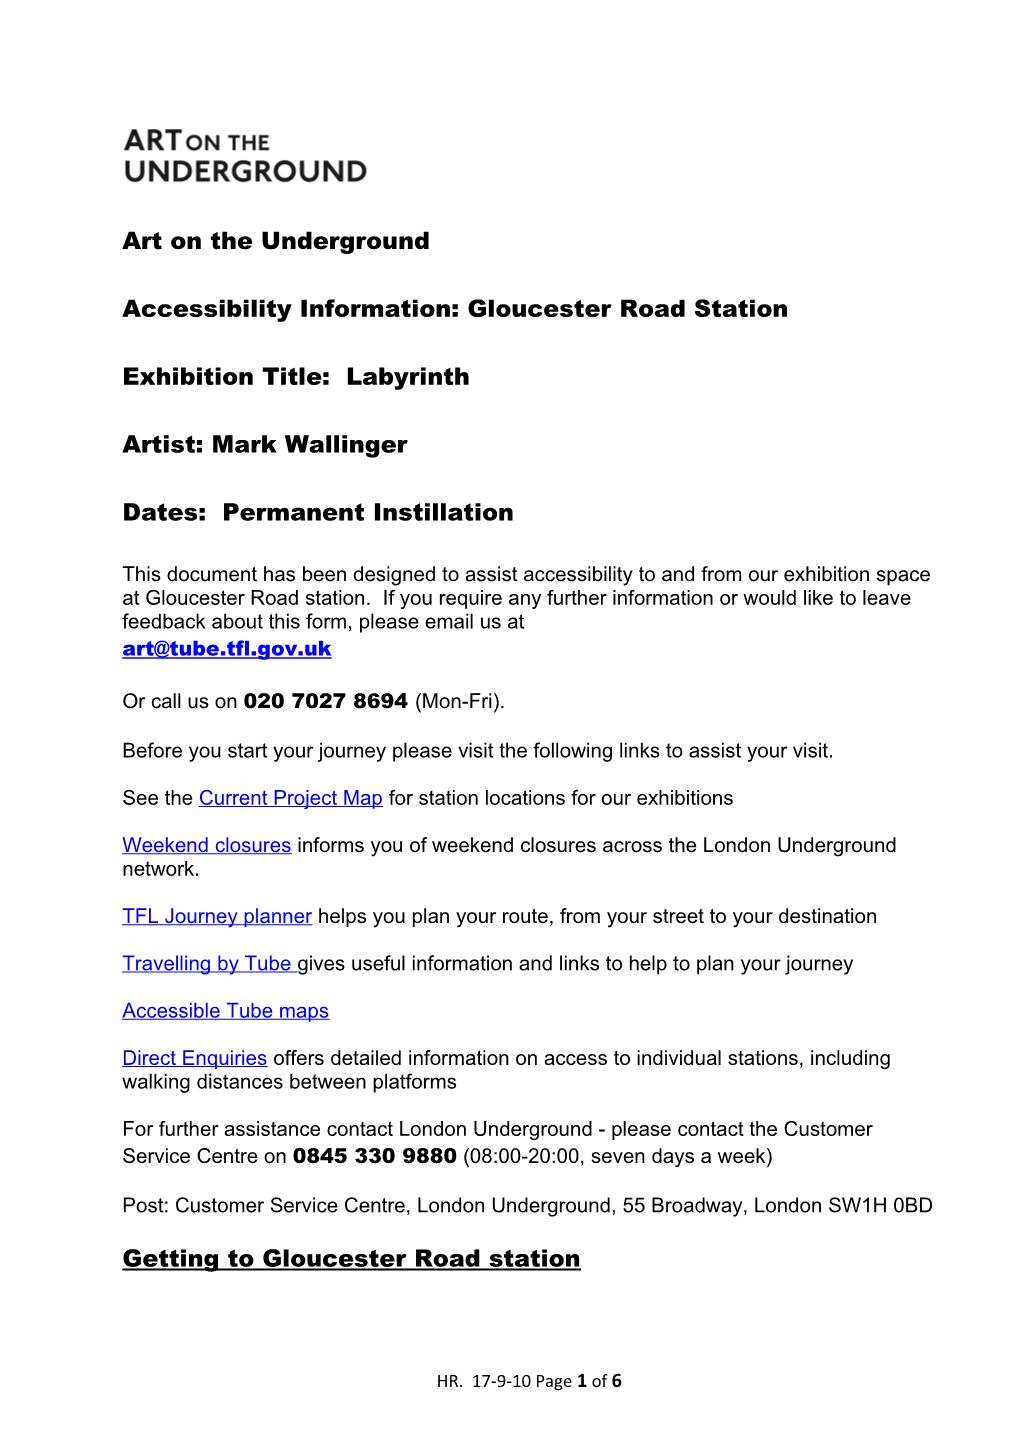 Accessibility Information: Gloucester Road Station